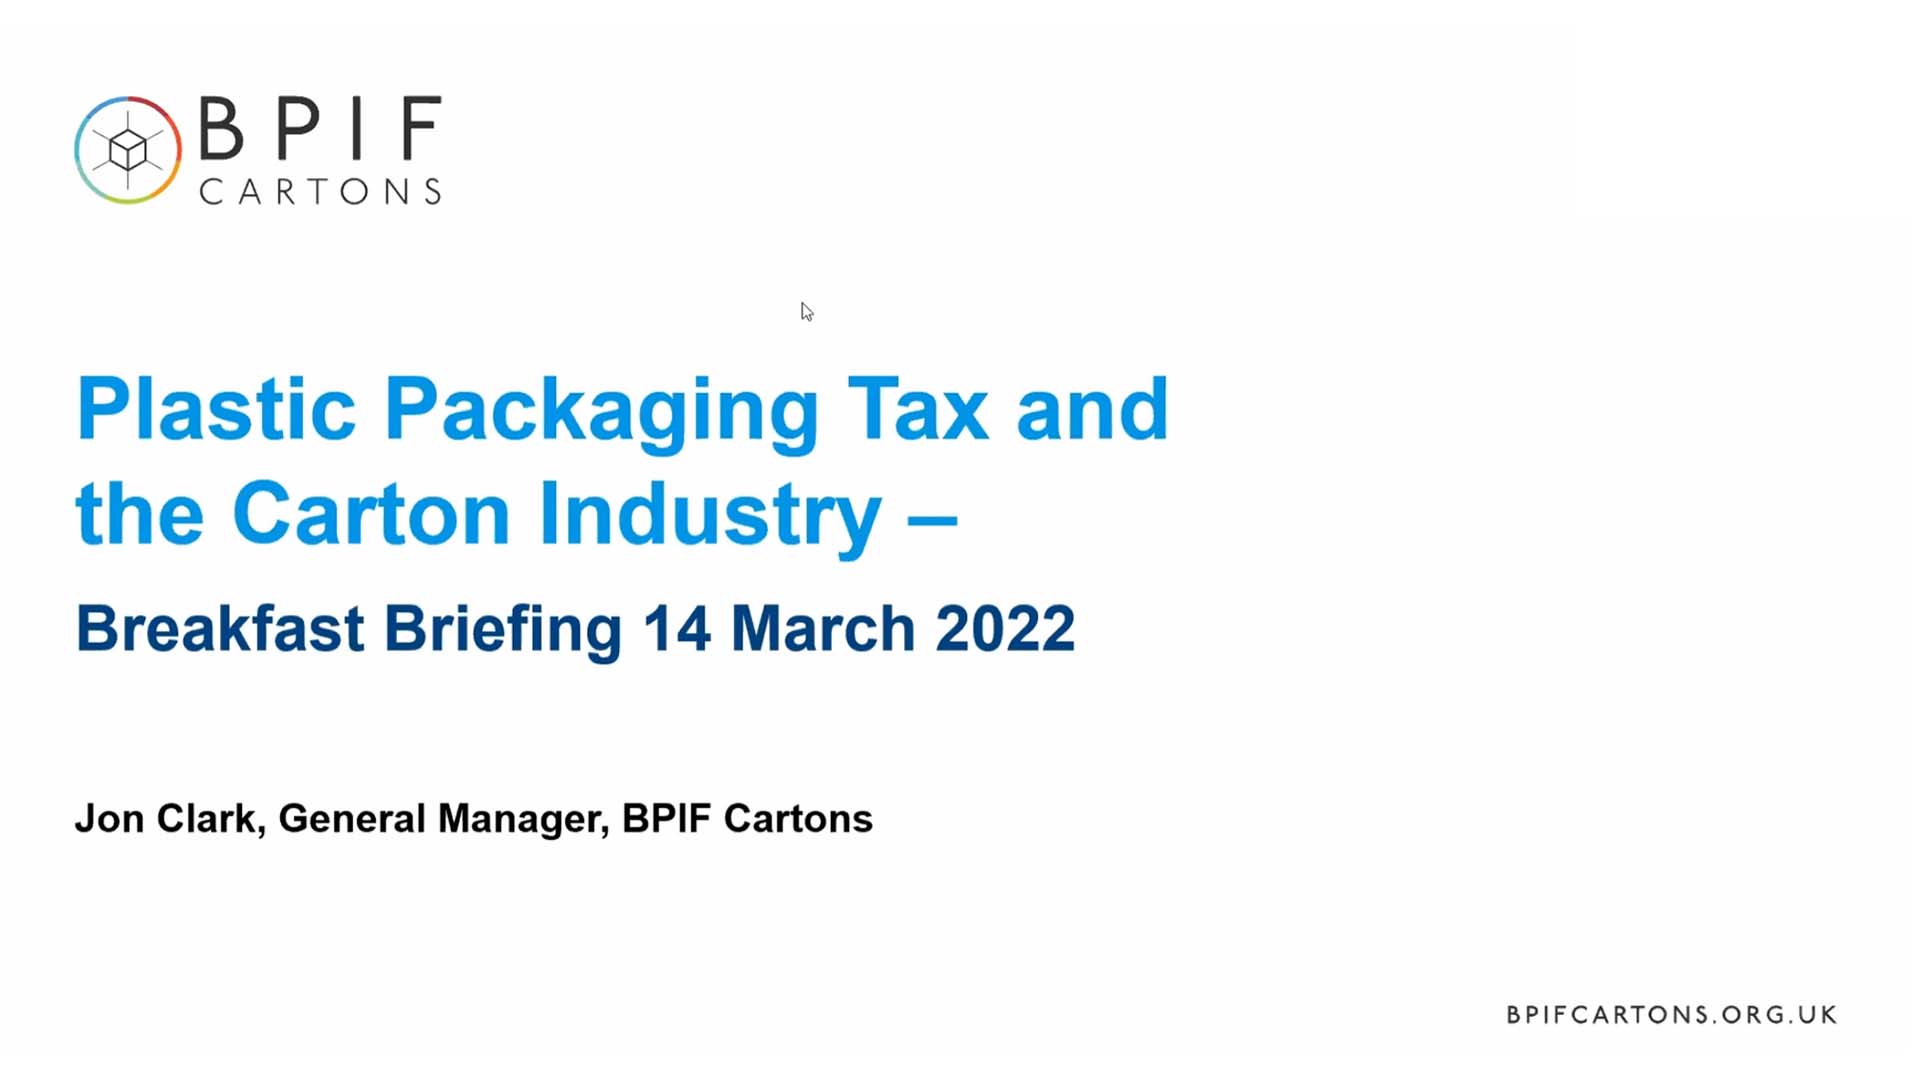 Breakfast Briefing: Plastic Packaging Tax for Cartons 14.03.2022